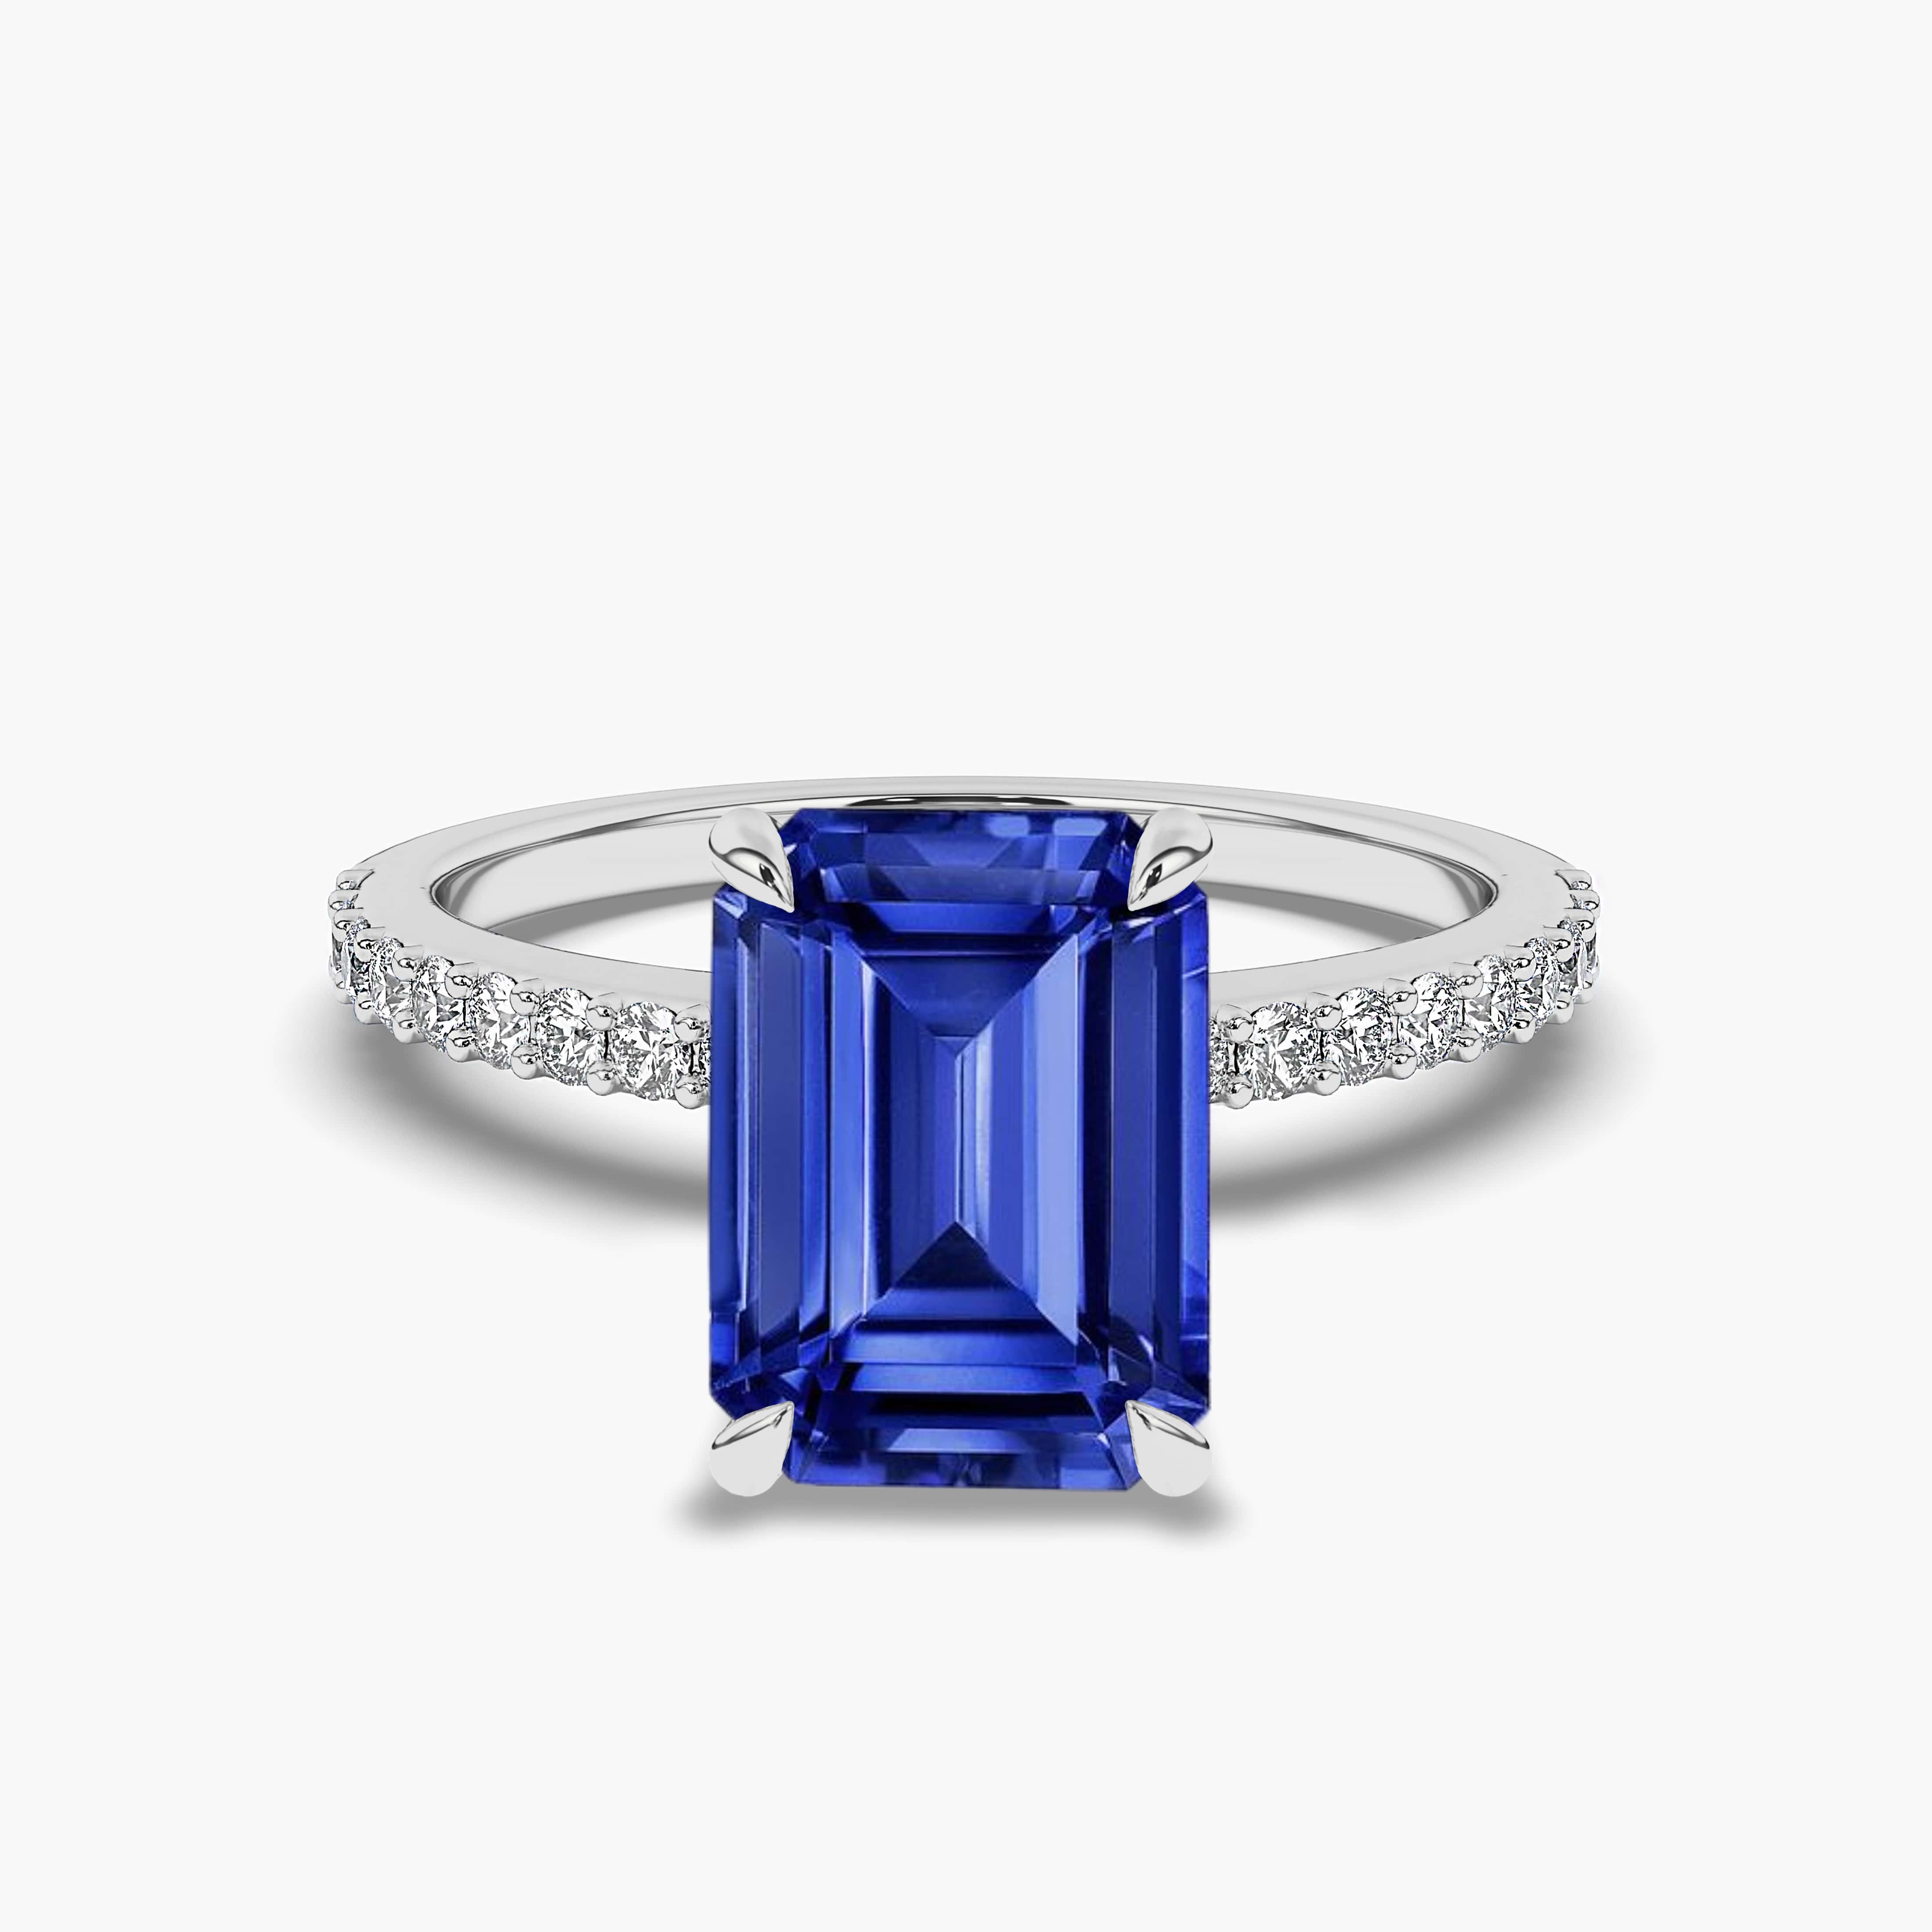 Emerald-Cut Blue Sapphire and Diamond Engagement Ring in White Gold